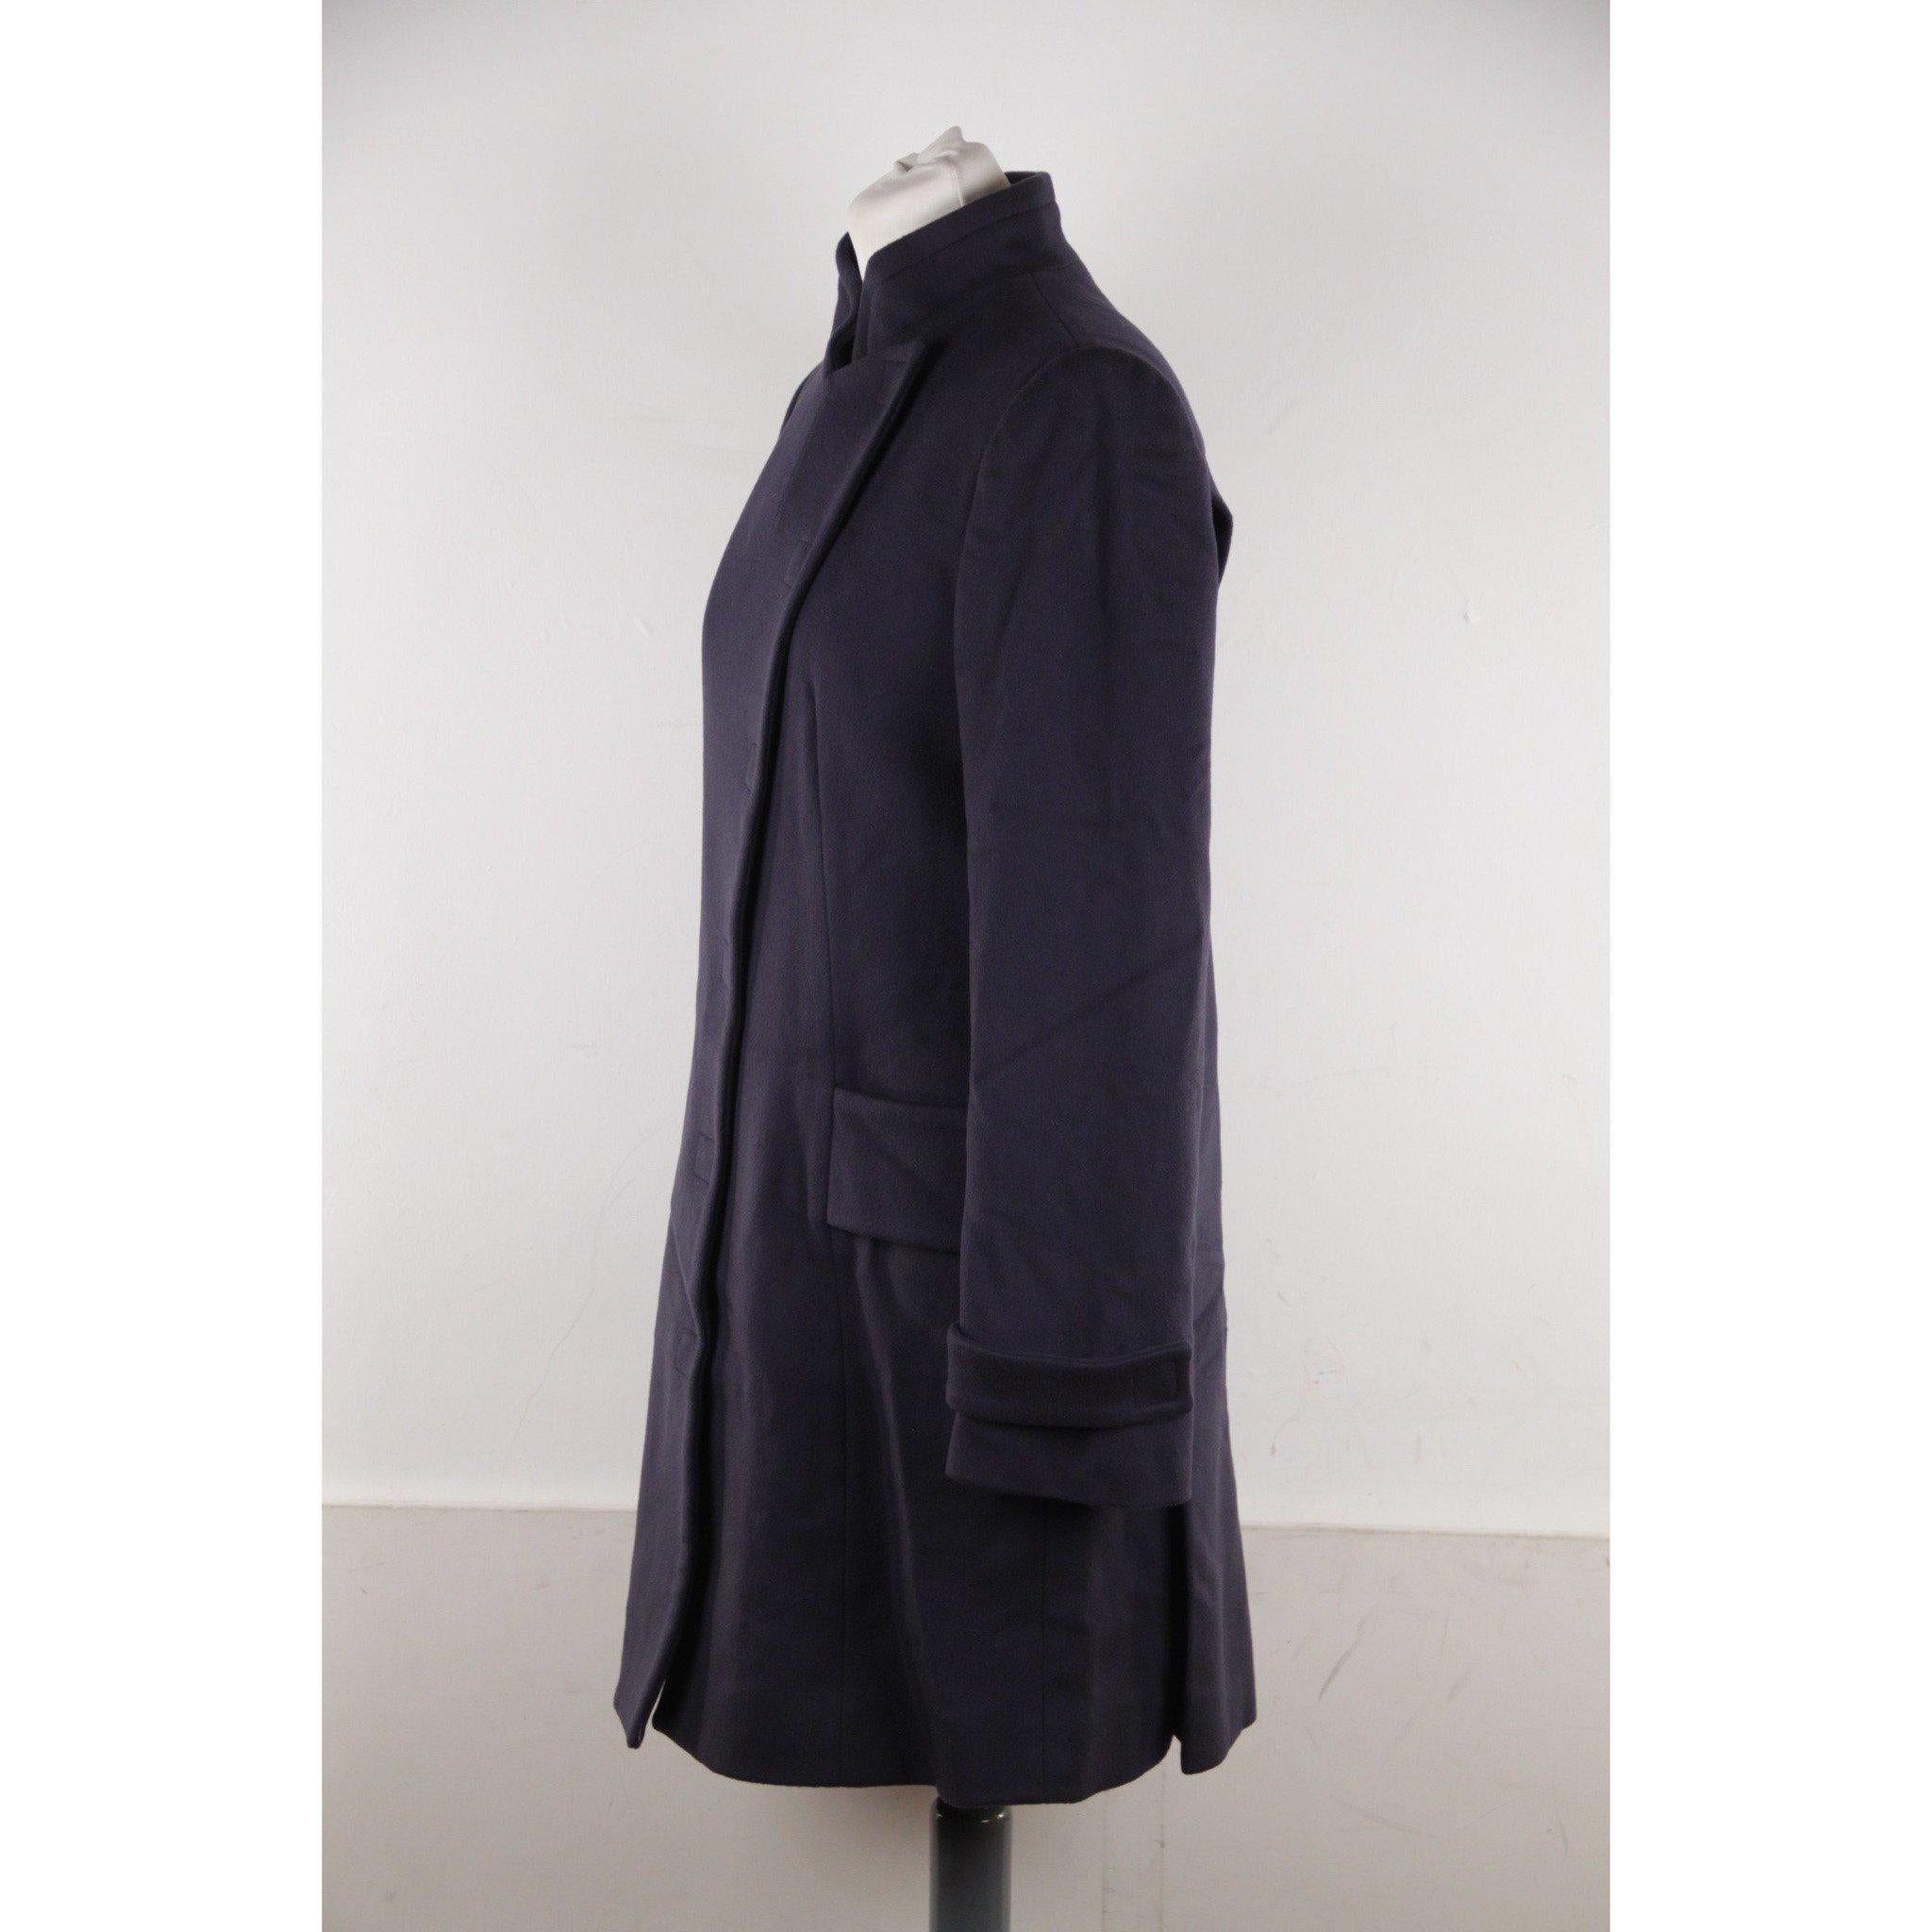 Black Versace Blue Wool Coat 2008 Fall Winter Collection Size 40